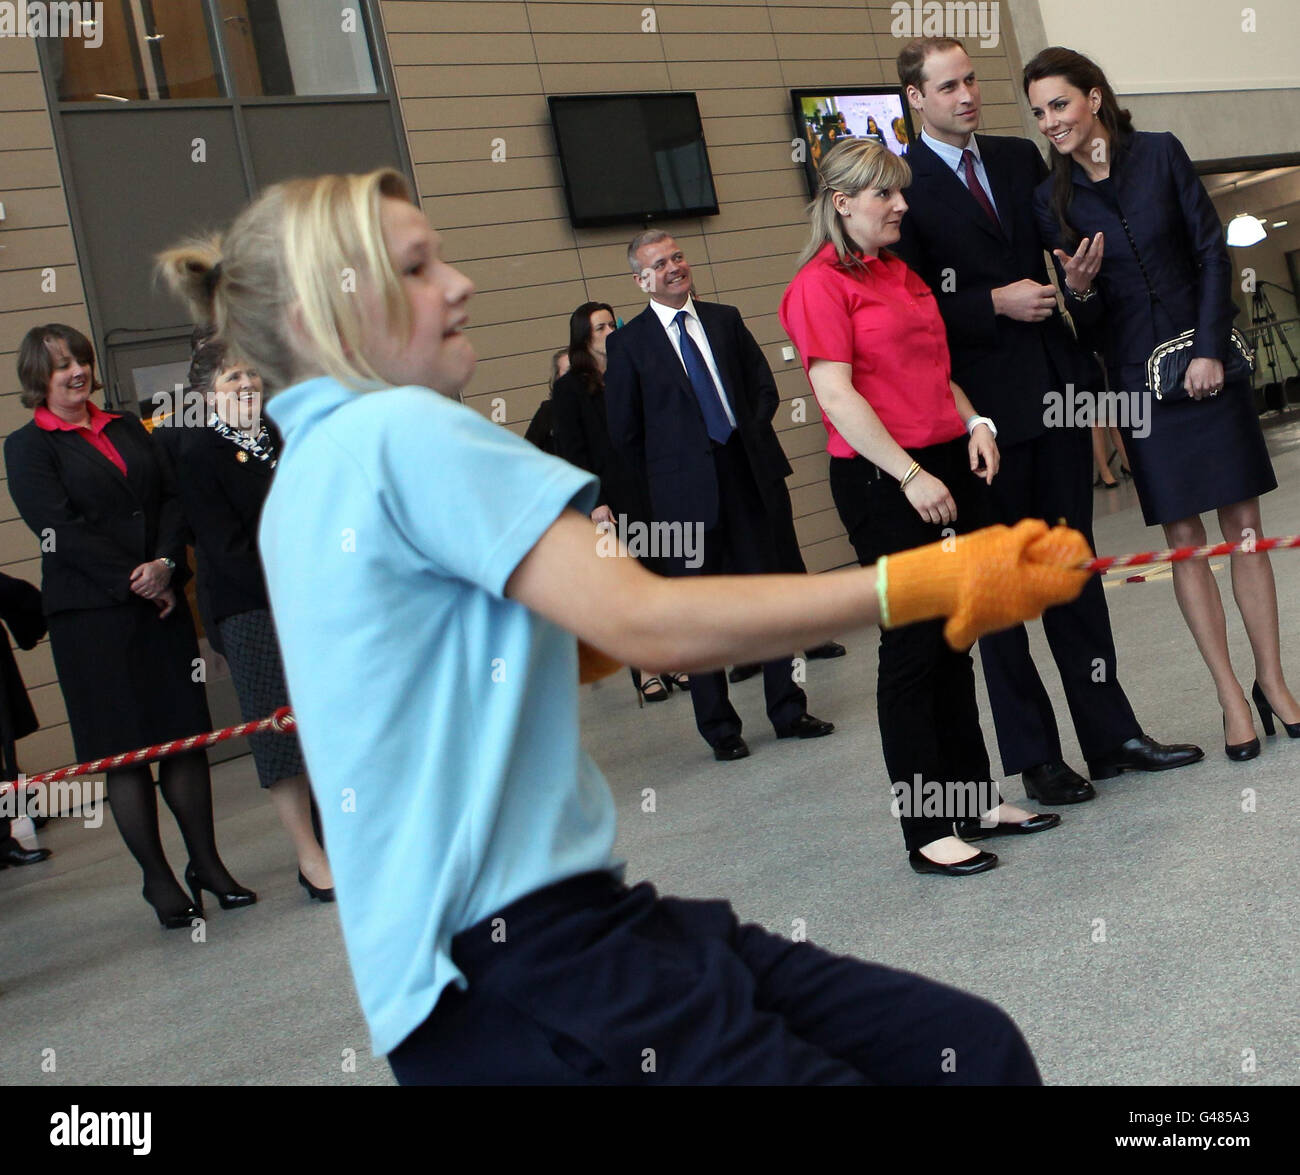 Prince William (2nd right) and his fiancee Kate Middleton (right) watch students demonstrate a physical exercise during their visit to Darwen Aldridge Community Academy in Darwen, Lancashire. Stock Photo